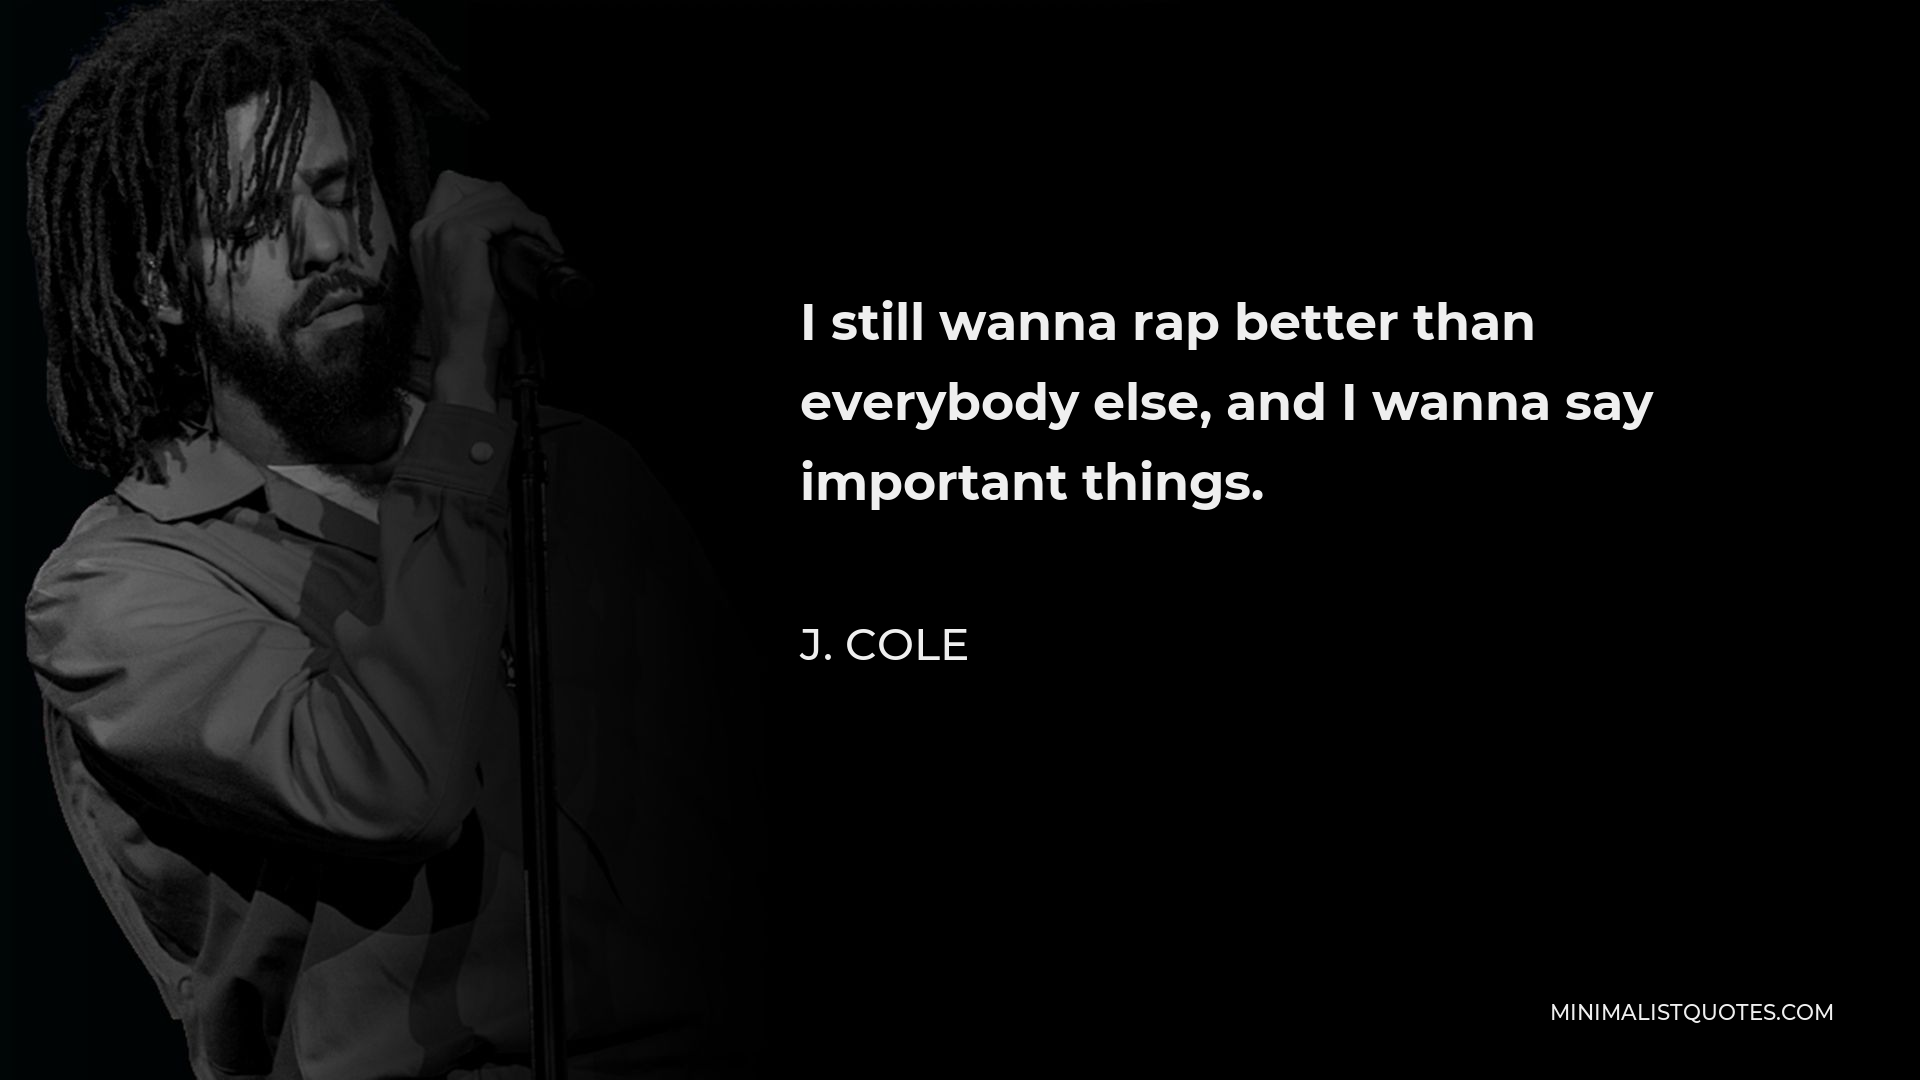 J. Cole Quote - I still wanna rap better than everybody else, and I wanna say important things.